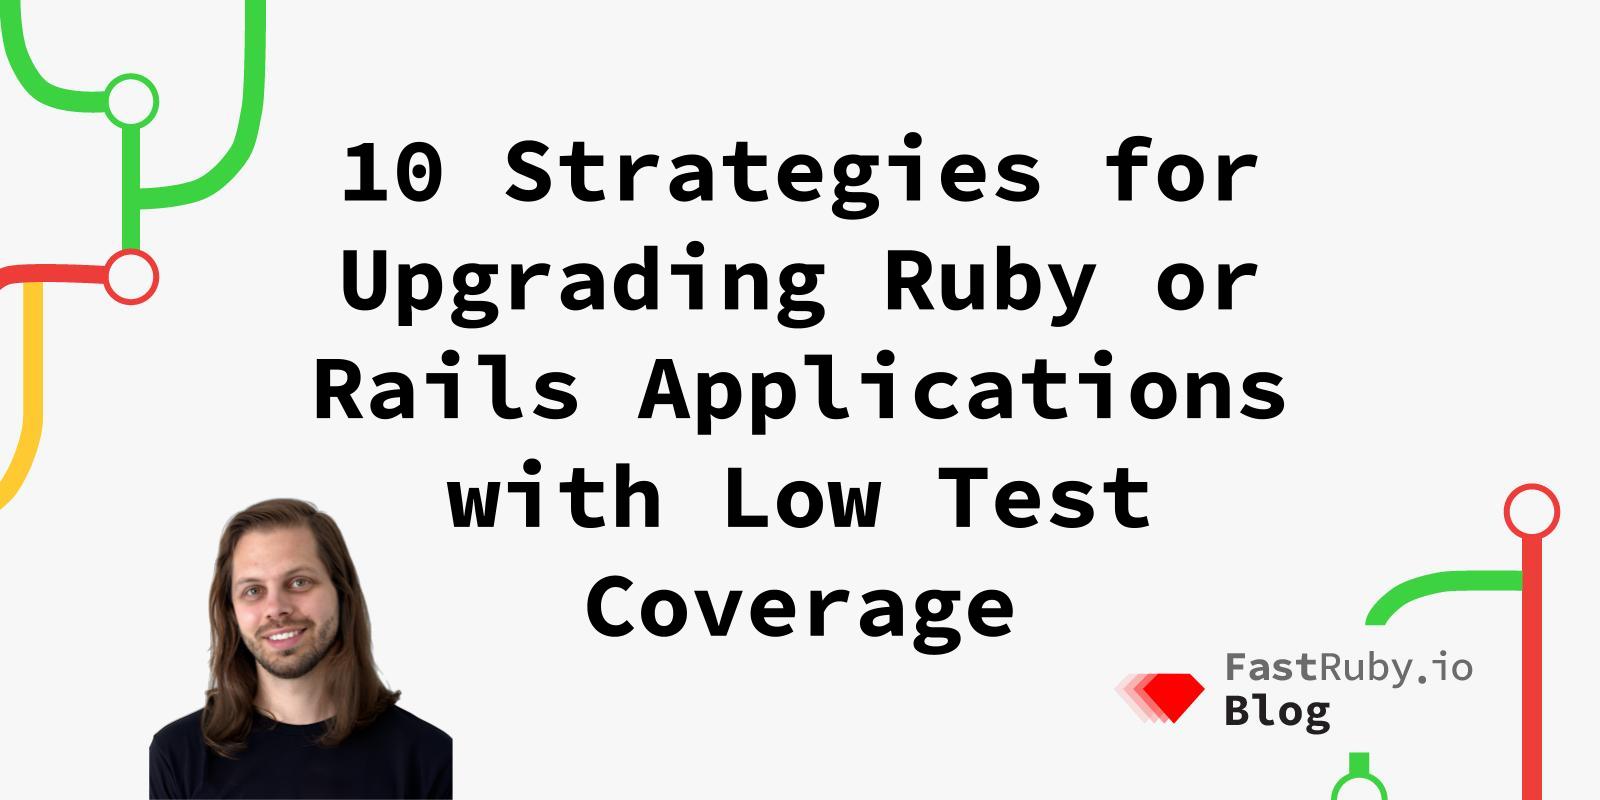 10 Strategies for Upgrading Ruby or Rails Applications with Low Test Coverage